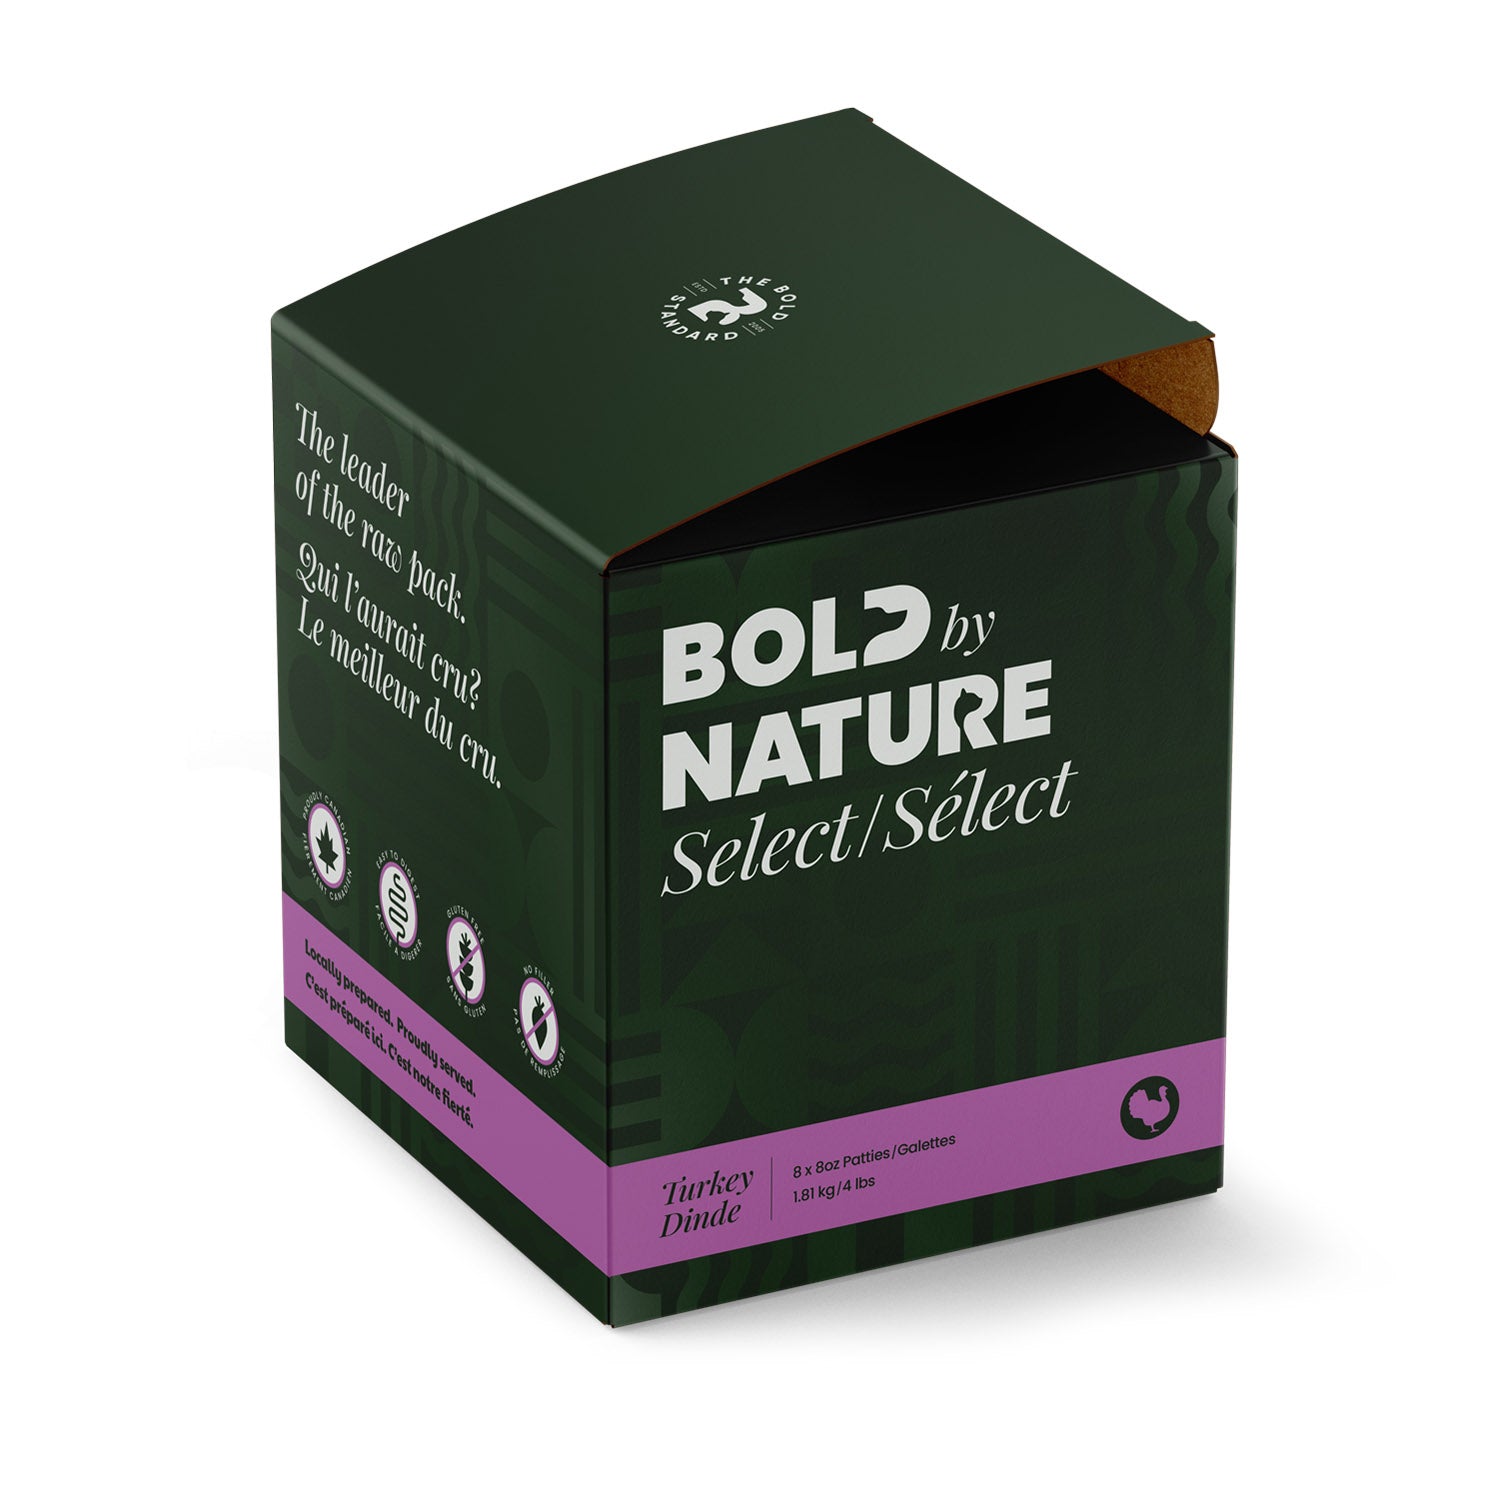 Bold by Nature (Bold Raw) - Select Turkey - Frozen Product